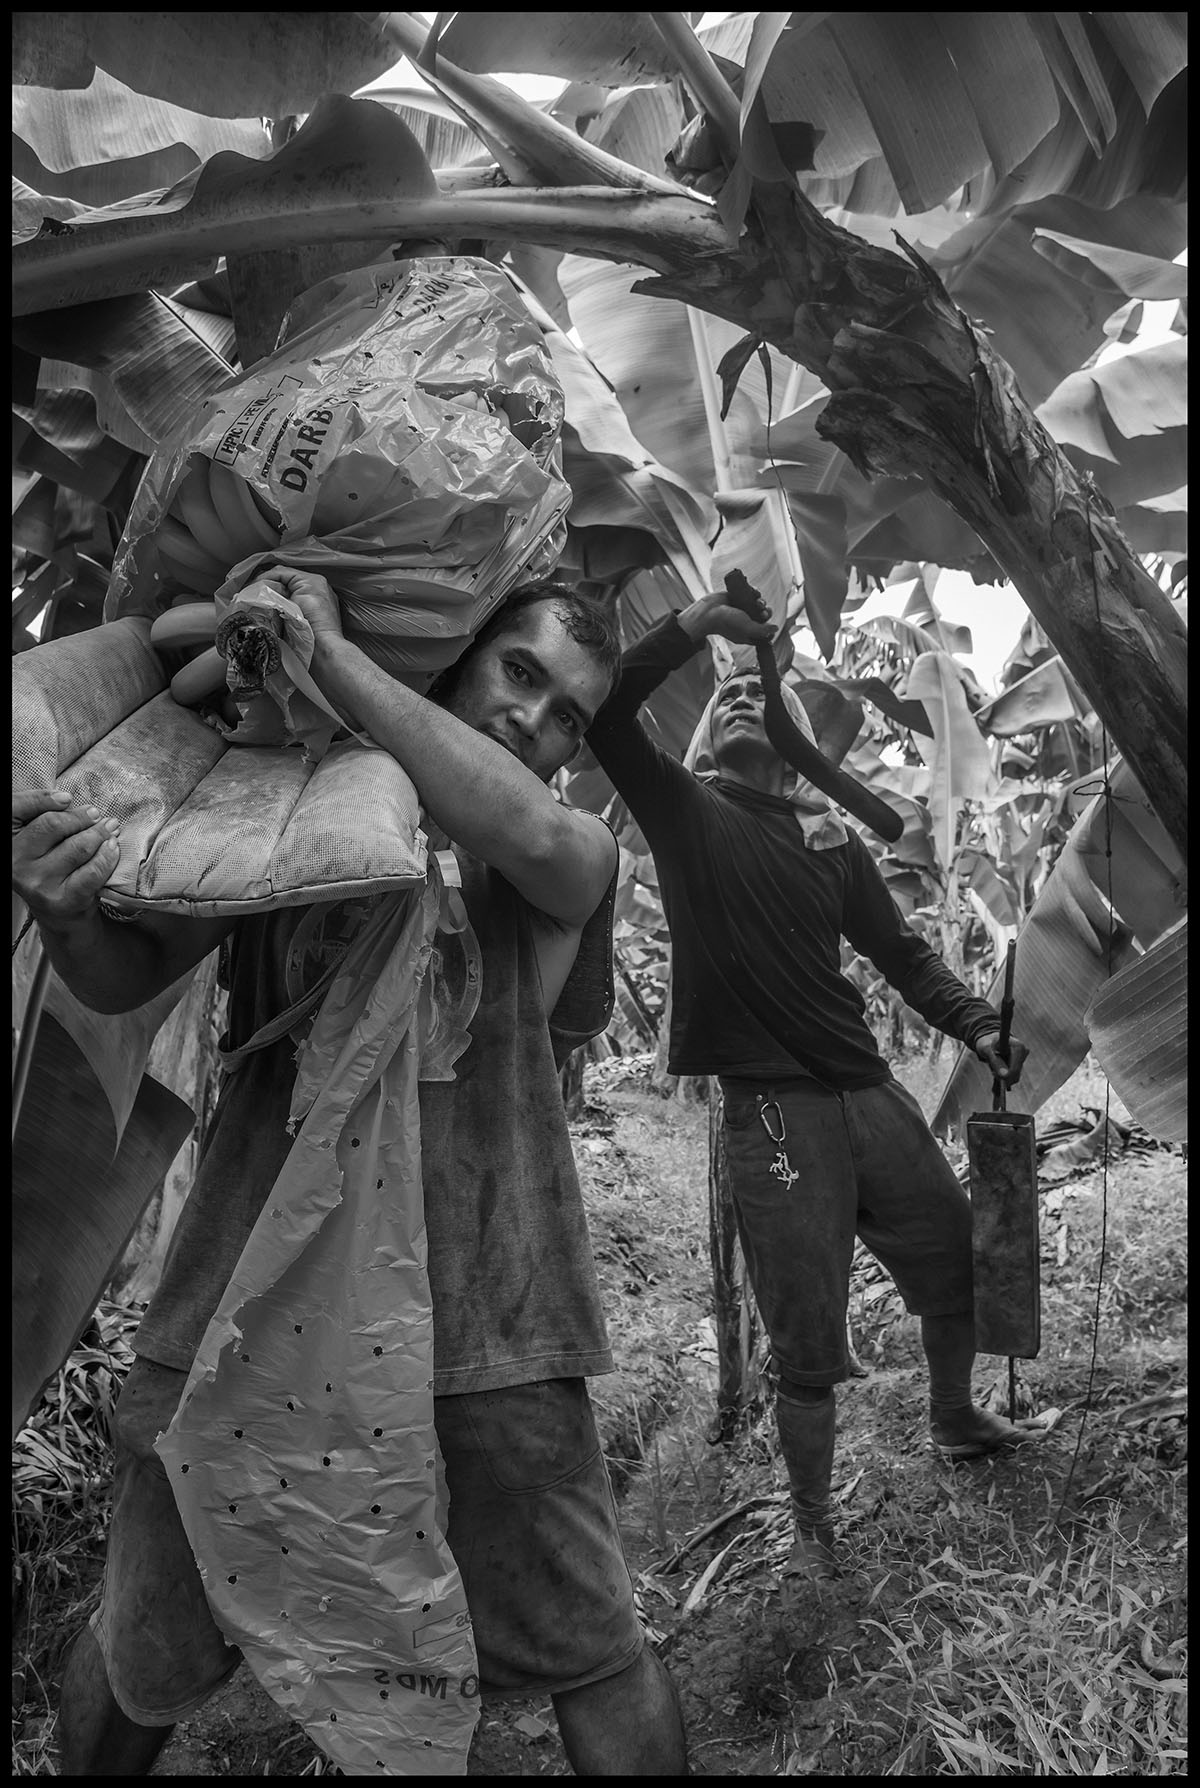 Workers harvest bananas in the field of the DARBCO cooperative in the Mindanao city of Panabo. 2019. The David Bacon Archive, Department of Special Collections, Stanford Libraries.